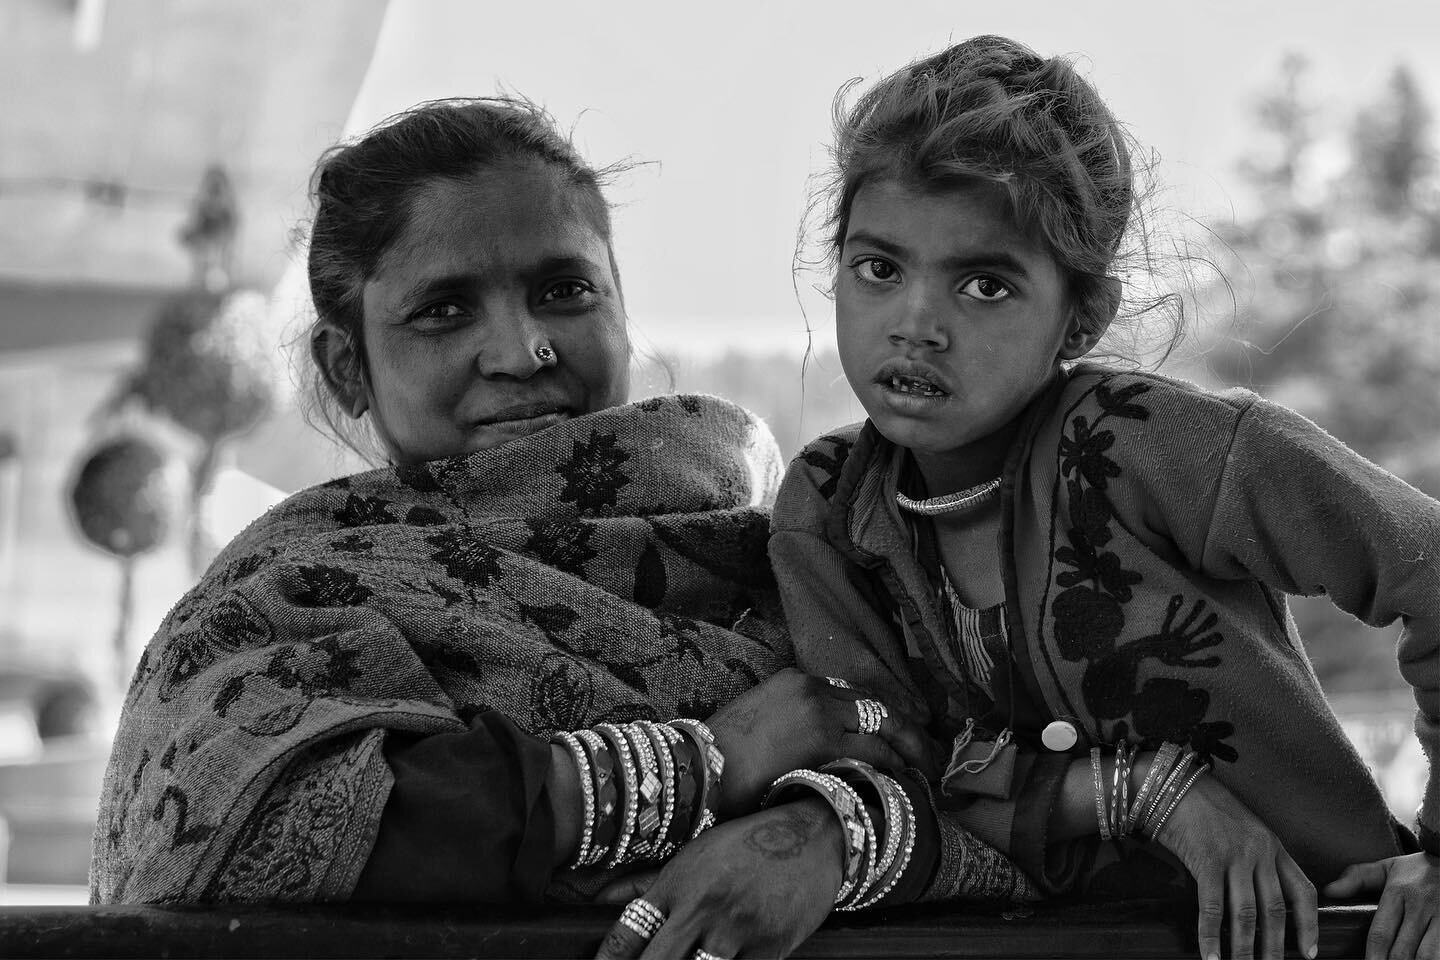 Her eyes were quite strong
.
Staring with blank expression
.
Who knows what she thought
.
- Haiku for Sankri Village girl with unflinching eyes